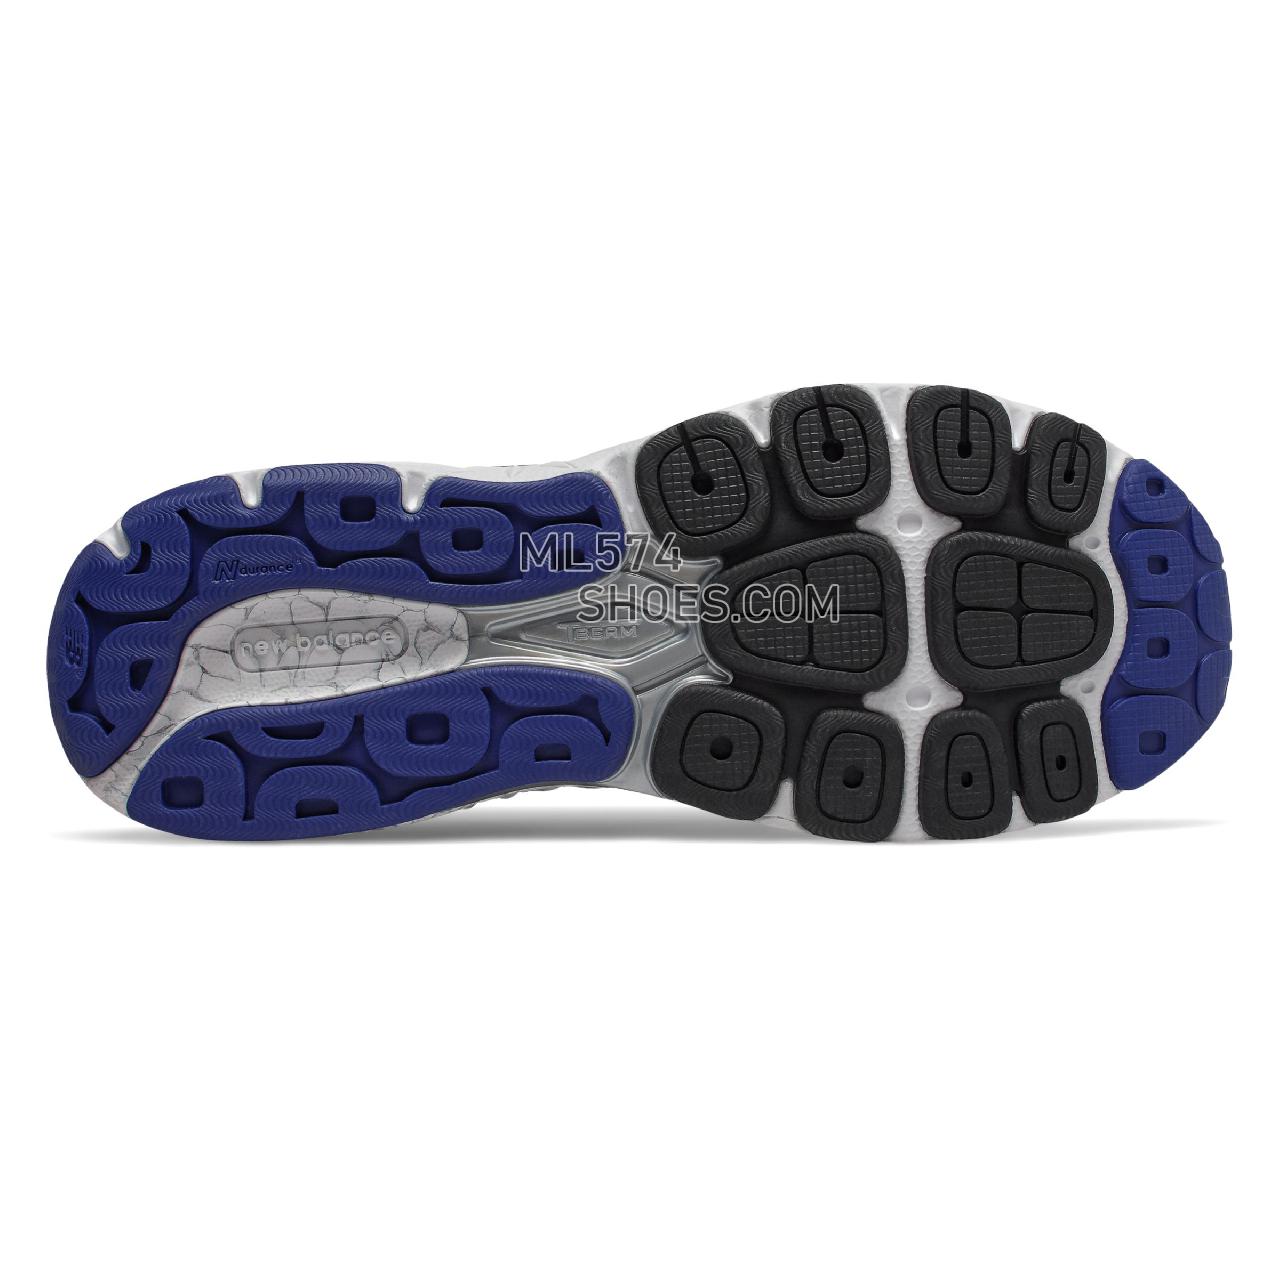 New Balance 940v4 - Men's Stability Running - Magnet with Marine Blue - M940GB4